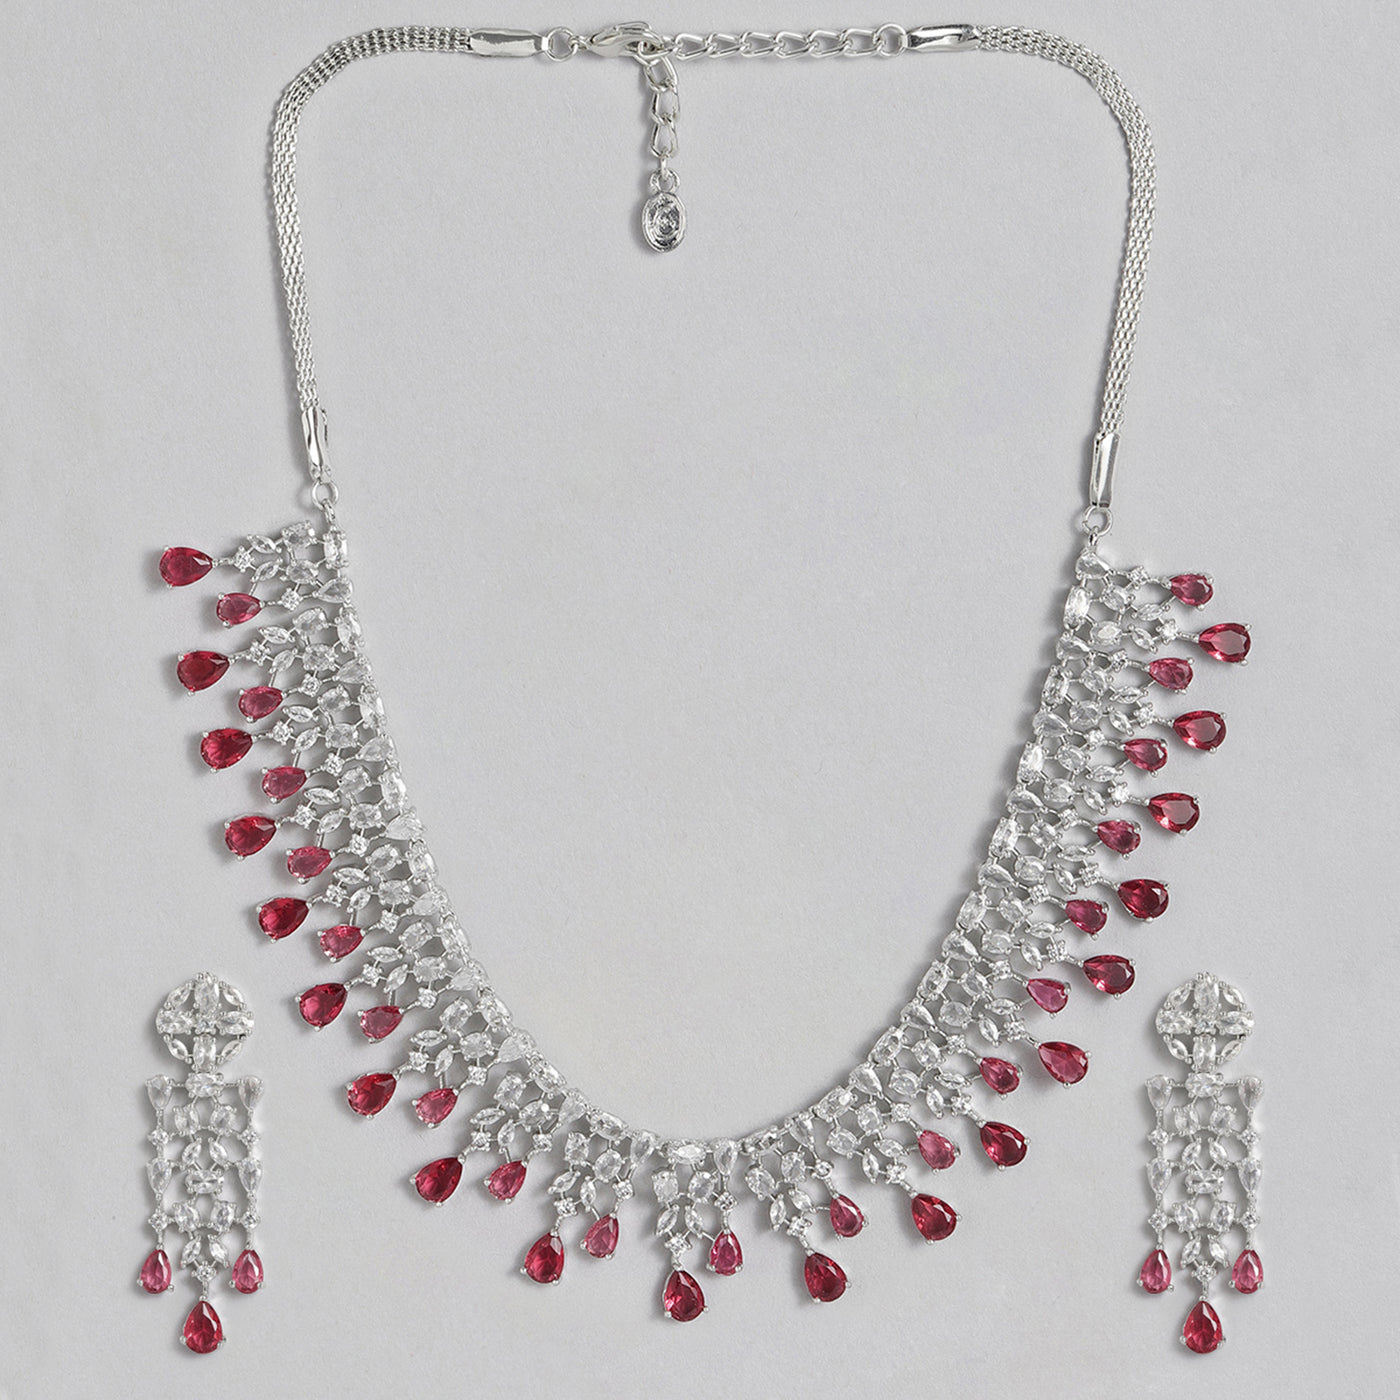 Estele Rhodium Plated CZ Beautiful Designer Necklace Set with Ruby Stones for Women